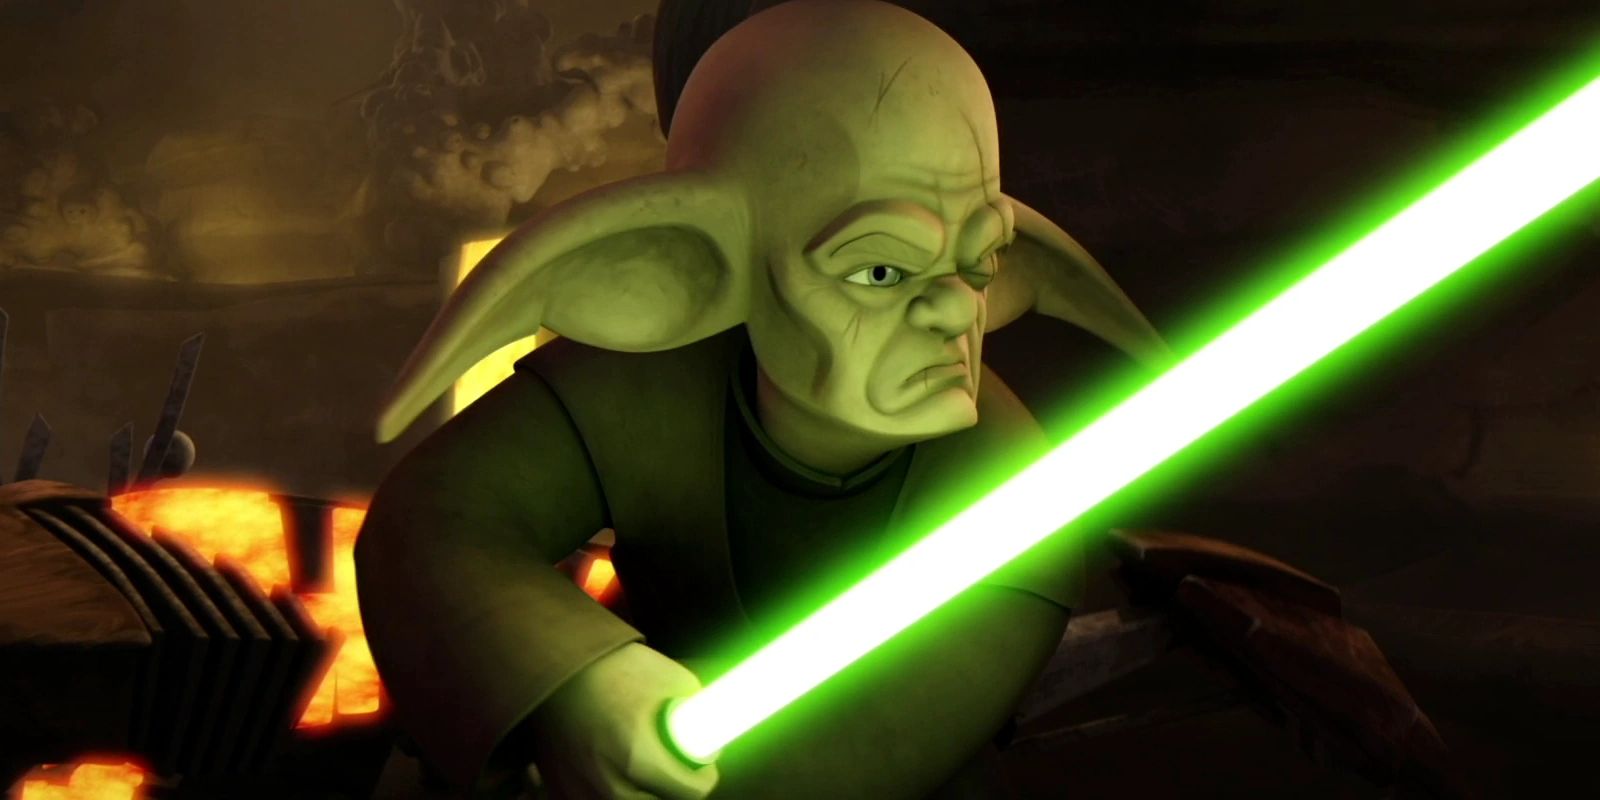 Even Piell in the Clone Wars, igniting his lightsaber